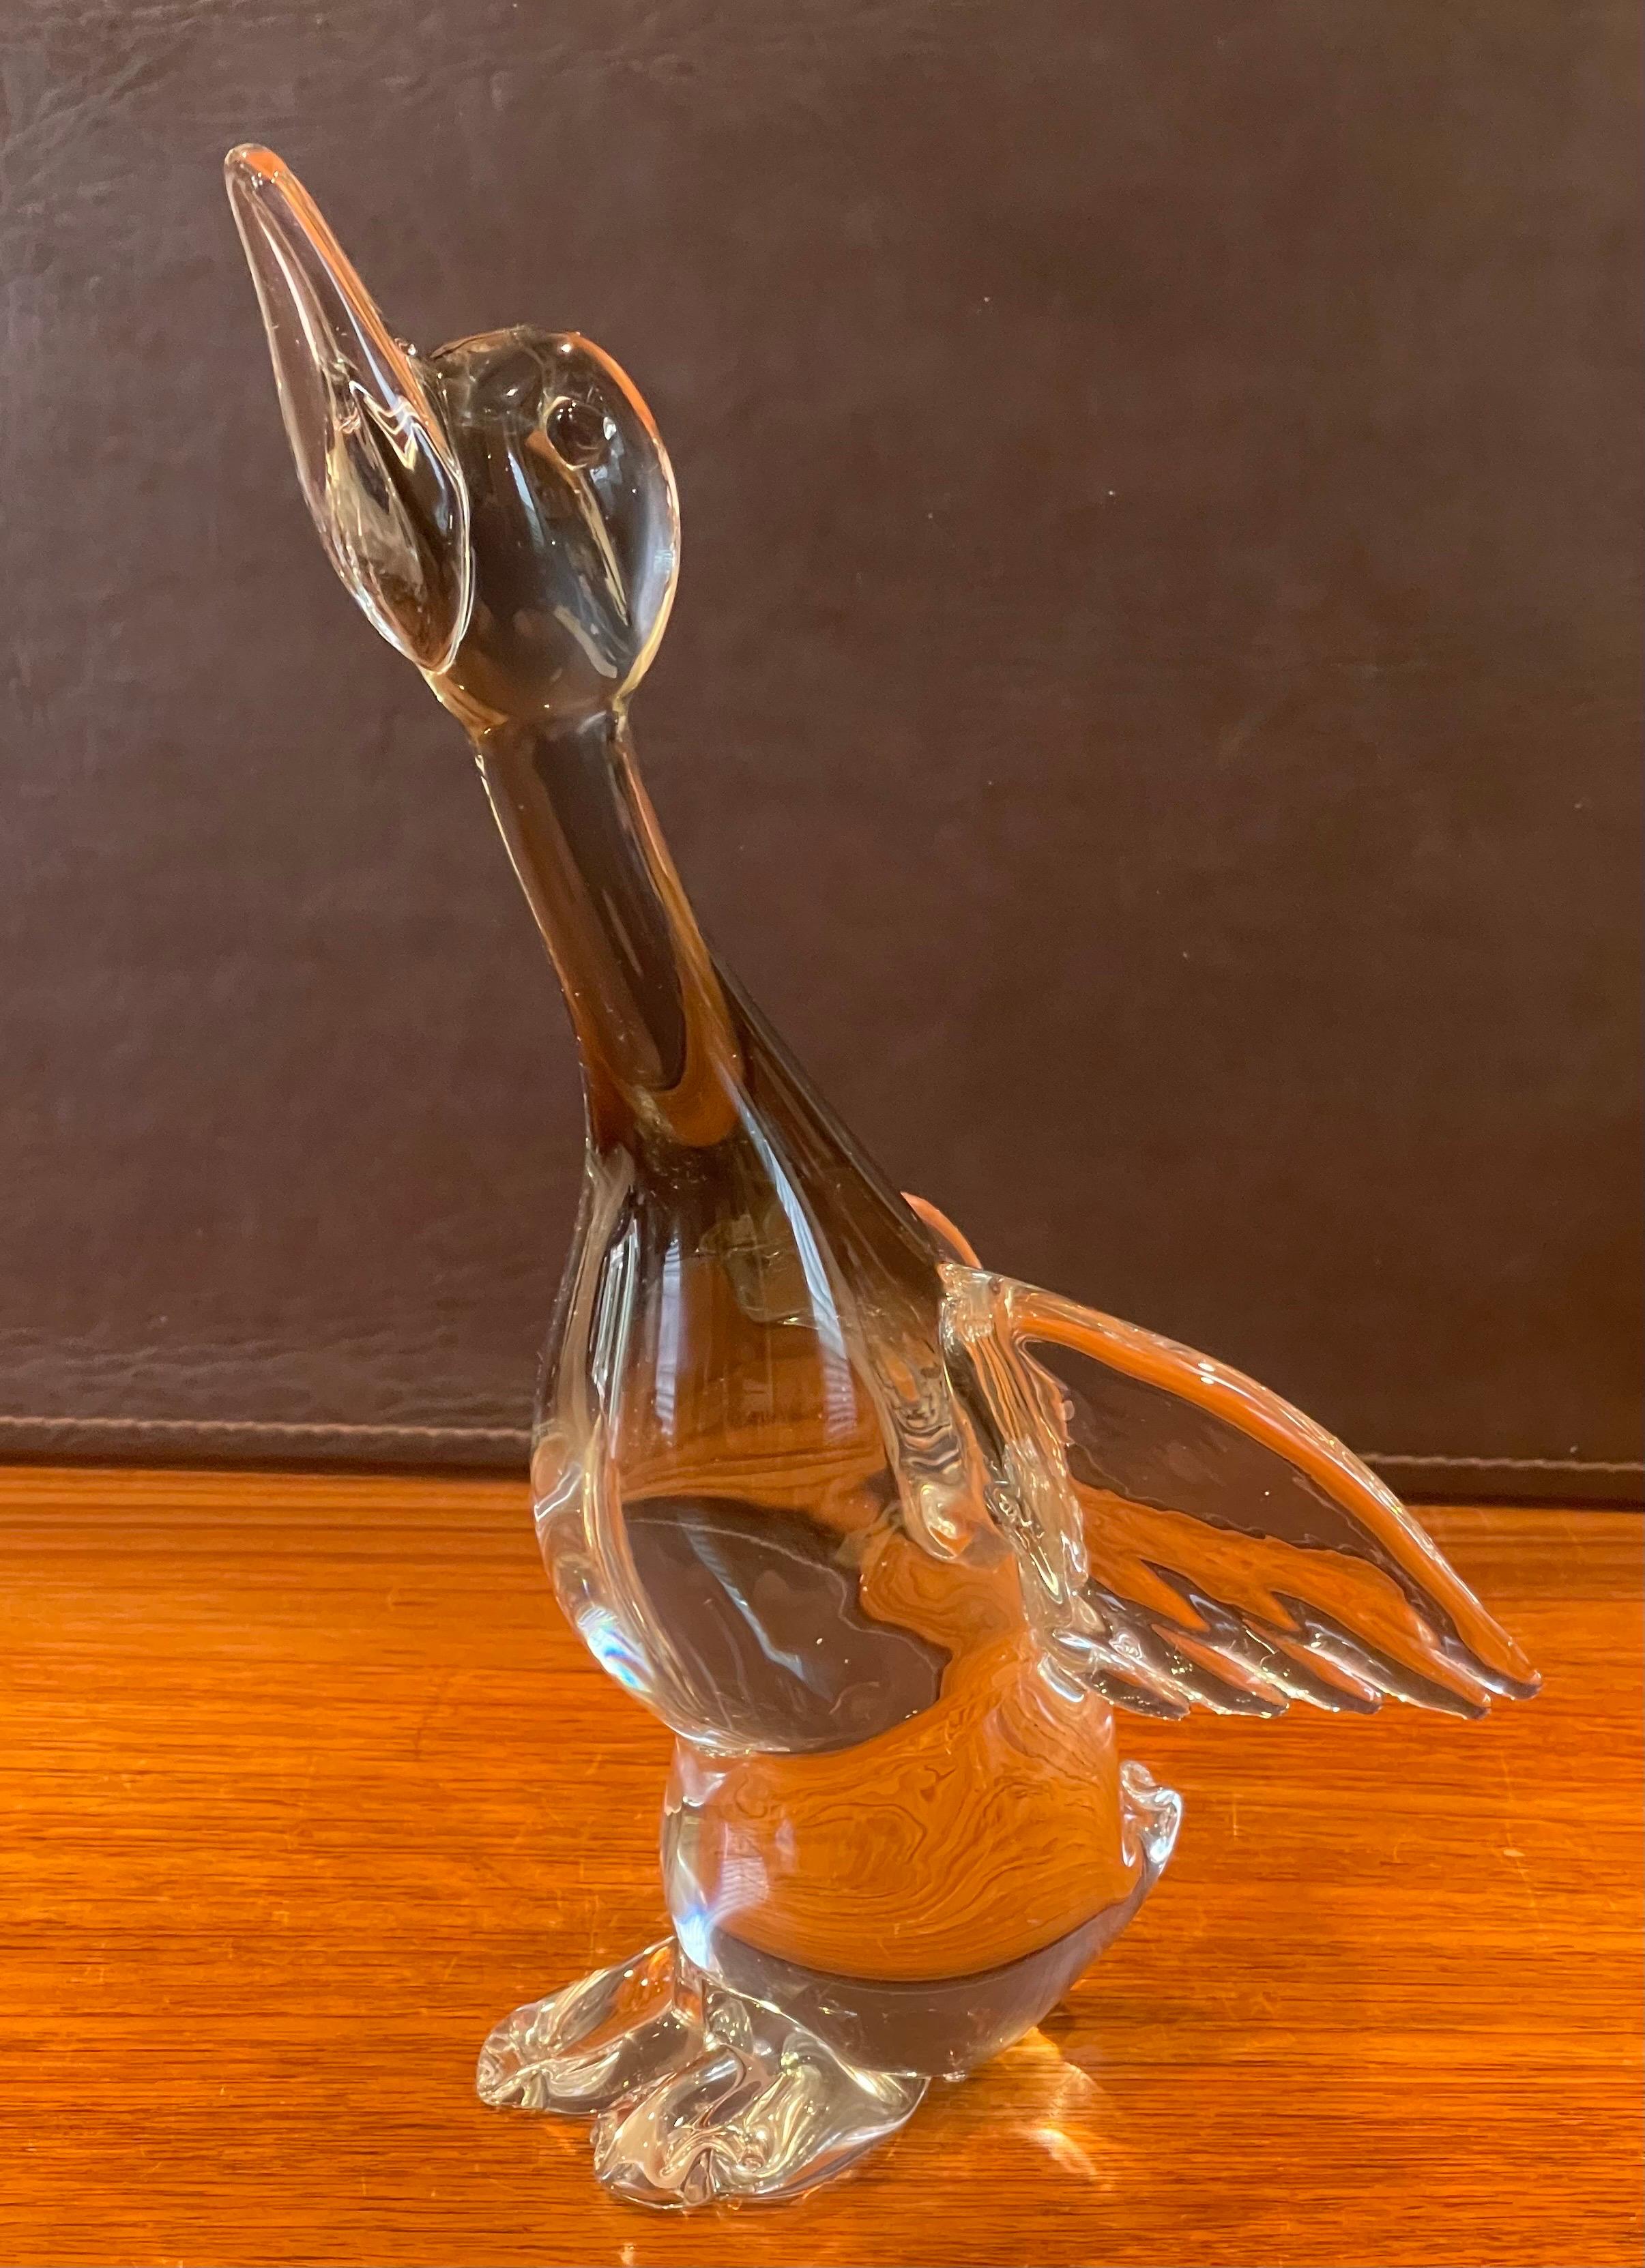 Majestic duck in flight art glass sculpture by Murano Glass, circa 1990s. The beautiful piece is clear glass with black sommerso in the body of the duck; really cool and realistic piece that measures 5.5